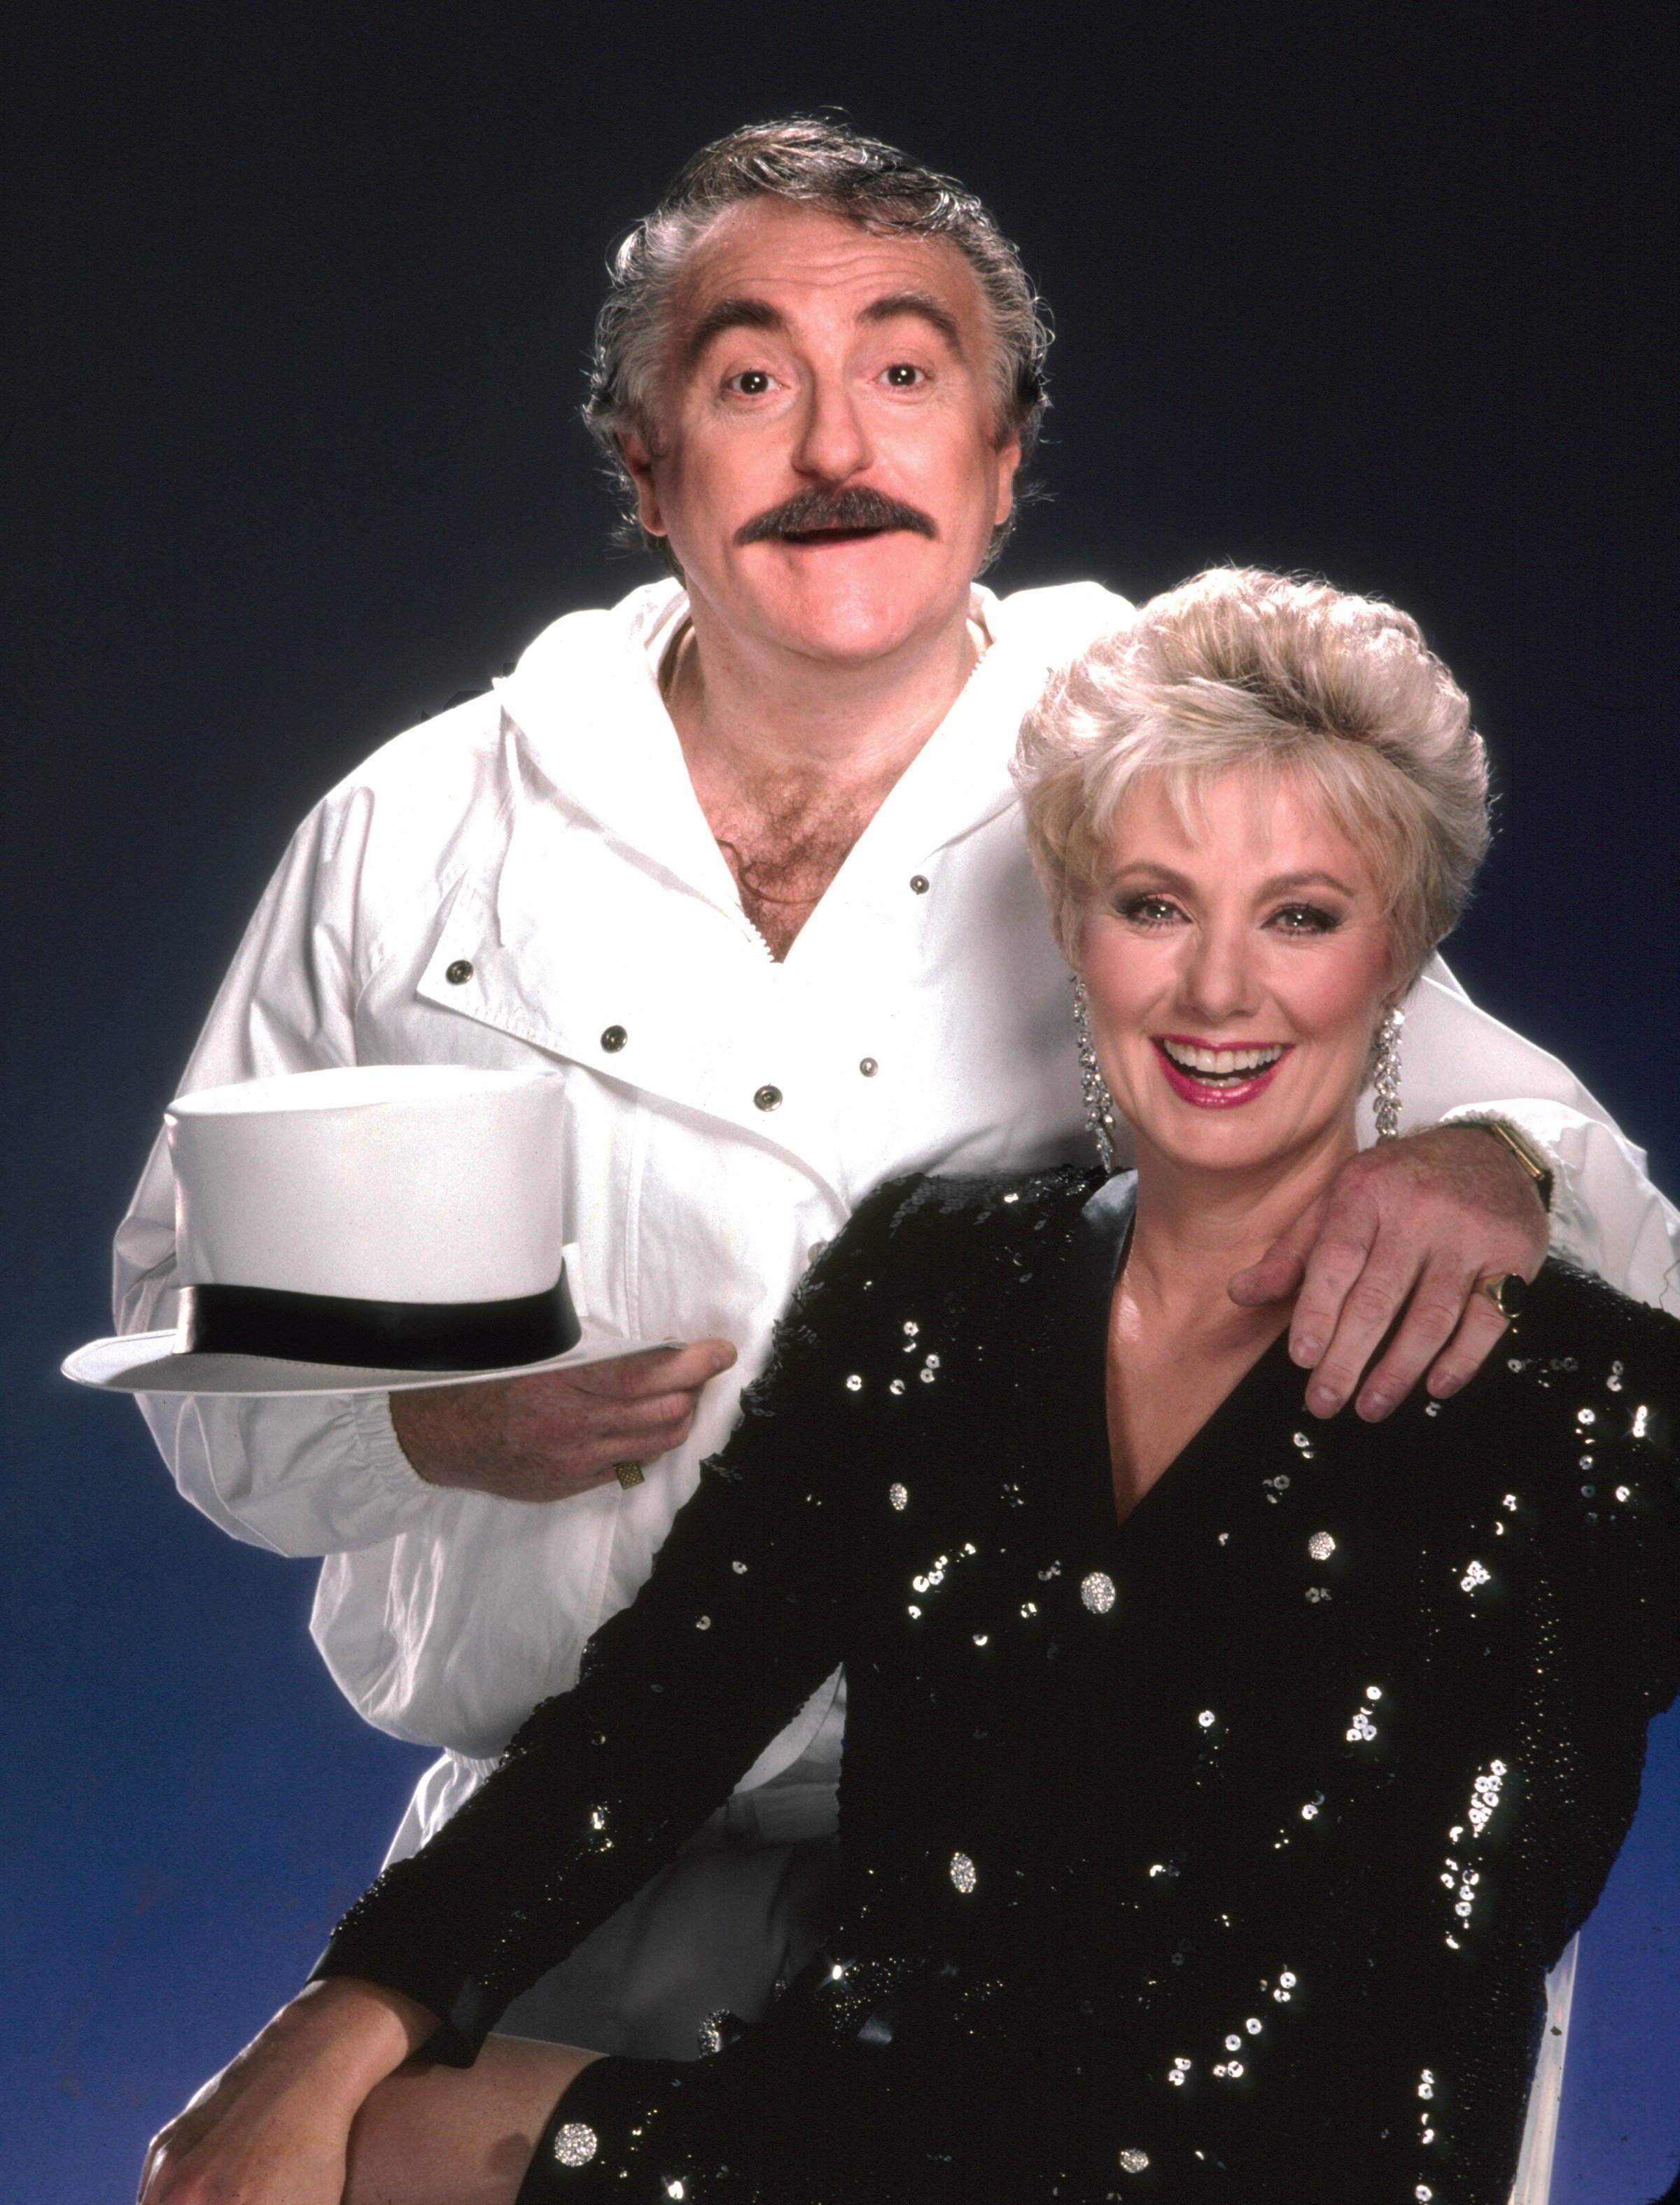 Marty Ingels posing for a portrait with Shirley Jones in 1986, in Los Angeles, California. | Source: Harry Langdon/Getty Images